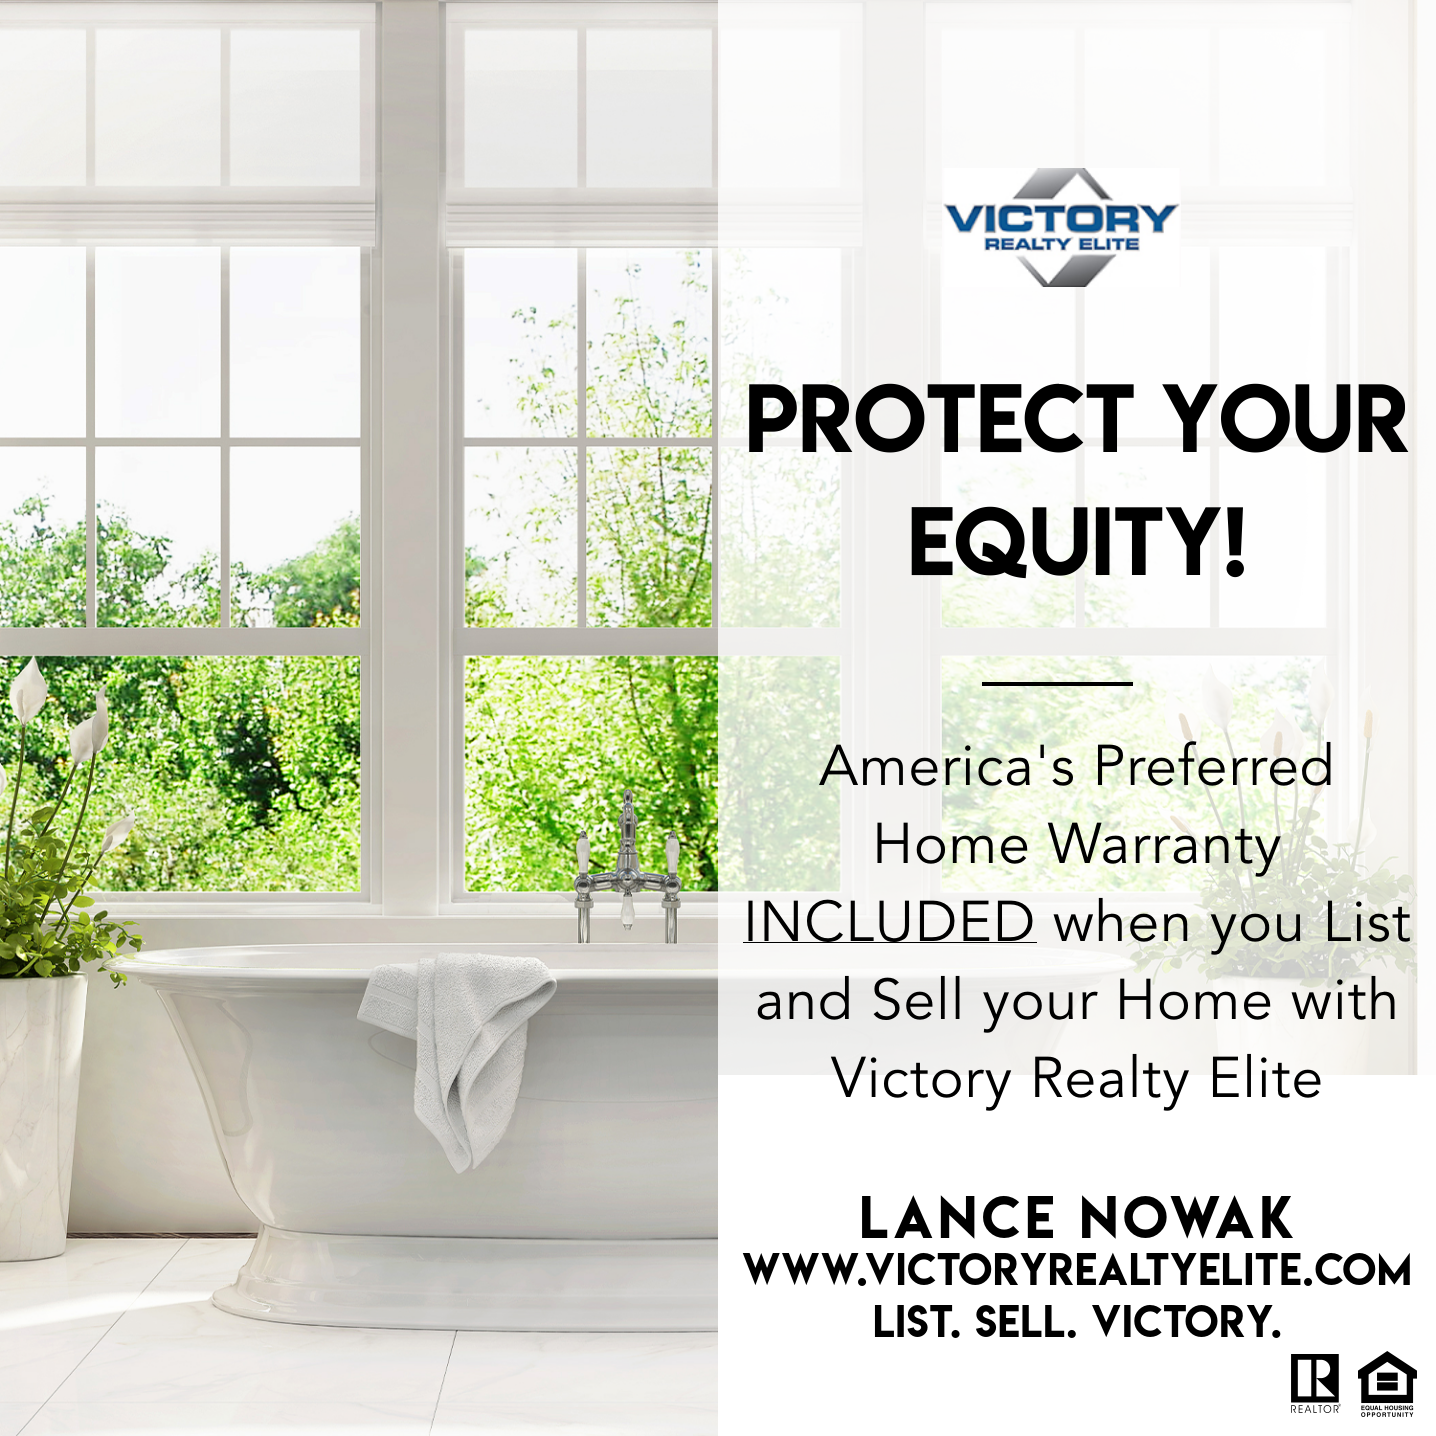 Protect Your Equity!